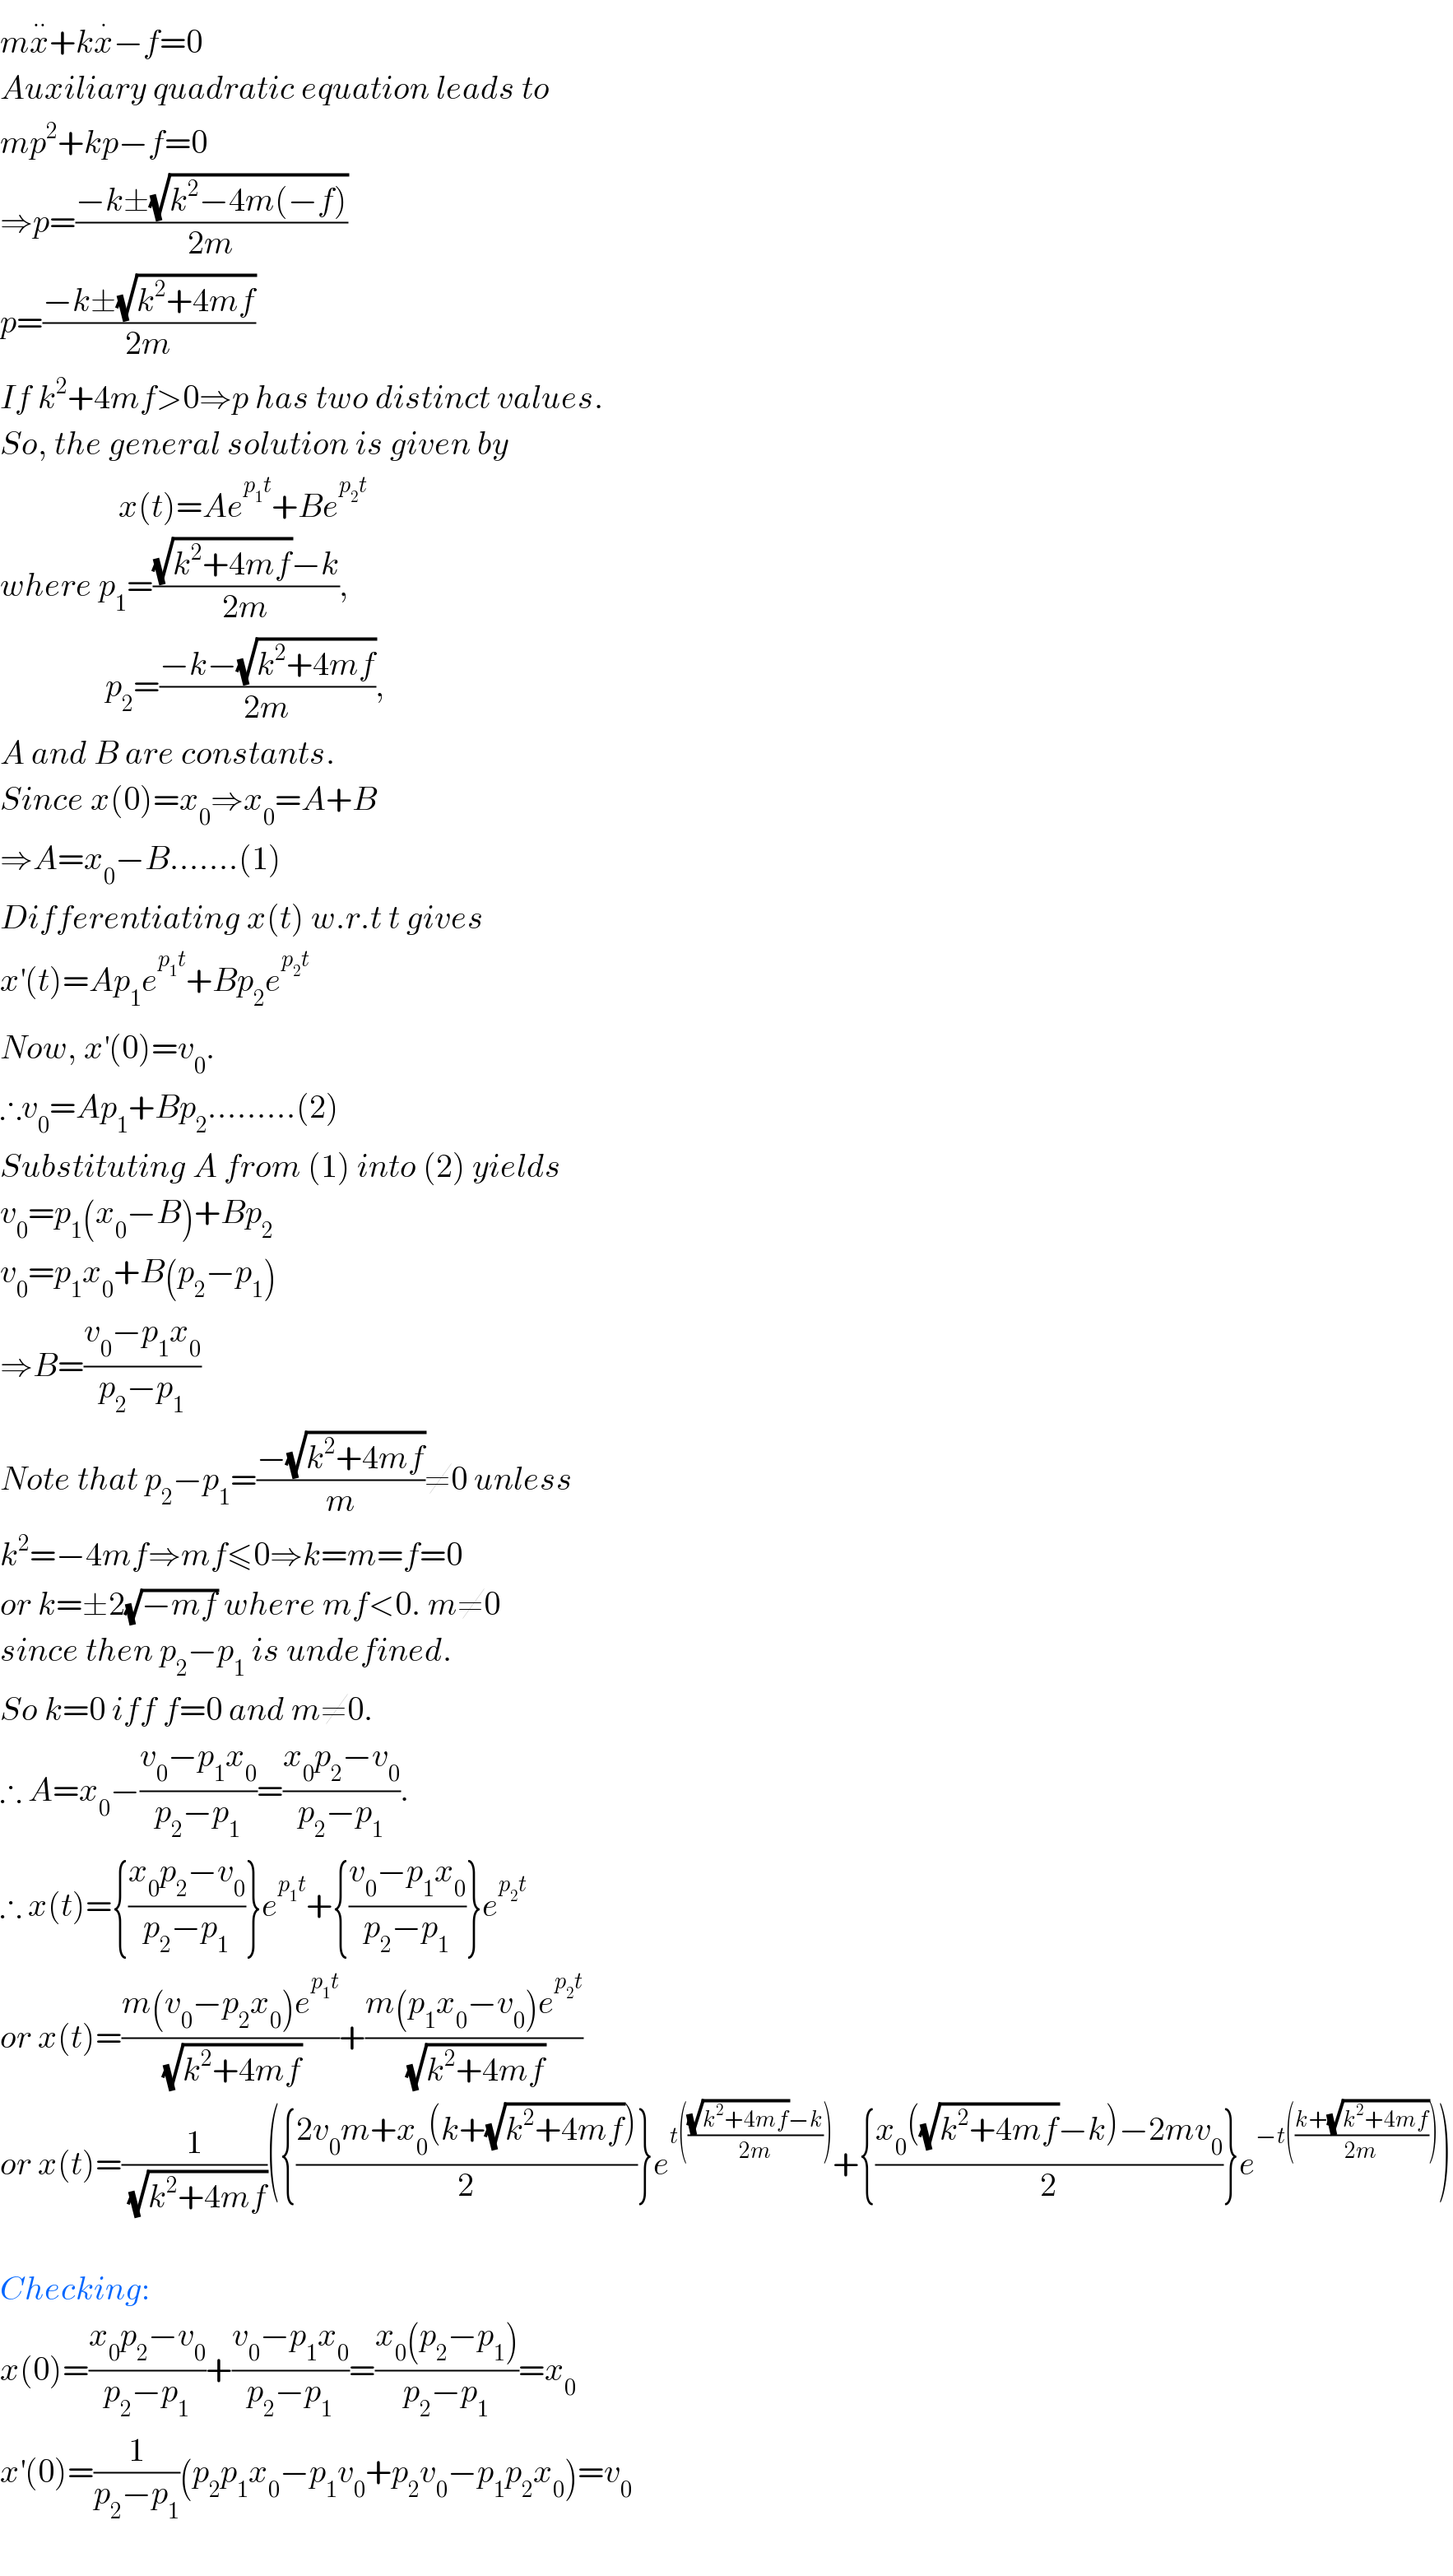 mx^(..) +kx^. −f=0  Auxiliary quadratic equation leads to  mp^2 +kp−f=0  ⇒p=((−k±(√(k^2 −4m(−f))))/(2m))  p=((−k±(√(k^2 +4mf)))/(2m))  If k^2 +4mf>0⇒p has two distinct values.  So, the general solution is given by                    x(t)=Ae^(p_1 t) +Be^(p_2 t)   where p_1 =(((√(k^2 +4mf))−k)/(2m)),                  p_2 =((−k−(√(k^2 +4mf)))/(2m)),  A and B are constants.  Since x(0)=x_0 ⇒x_0 =A+B  ⇒A=x_0 −B.......(1)  Differentiating x(t) w.r.t t gives  x^′ (t)=Ap_1 e^(p_1 t) +Bp_2 e^(p_2 t)   Now, x^′ (0)=v_0 .  ∴v_0 =Ap_1 +Bp_2 .........(2)  Substituting A from (1) into (2) yields  v_0 =p_1 (x_0 −B)+Bp_2   v_0 =p_1 x_0 +B(p_2 −p_1 )  ⇒B=((v_0 −p_1 x_0 )/(p_2 −p_1 ))  Note that p_2 −p_1 =((−(√(k^2 +4mf)))/m)≠0 unless  k^2 =−4mf⇒mf≤0⇒k=m=f=0  or k=±2(√(−mf)) where mf<0. m≠0  since then p_2 −p_1  is undefined.  So k=0 iff f=0 and m≠0.  ∴ A=x_0 −((v_0 −p_1 x_0 )/(p_2 −p_1 ))=((x_0 p_2 −v_0 )/(p_2 −p_1 )).  ∴ x(t)={((x_0 p_2 −v_0 )/(p_2 −p_1 ))}e^(p_1 t) +{((v_0 −p_1 x_0 )/(p_2 −p_1 ))}e^(p_2 t)   or x(t)=((m(v_0 −p_2 x_0 )e^(p_1 t) )/(√(k^2 +4mf)))+((m(p_1 x_0 −v_0 )e^(p_2 t) )/(√(k^2 +4mf)))  or x(t)=(1/(√(k^2 +4mf)))({((2v_0 m+x_0 (k+(√(k^2 +4mf))))/2)}e^(t((((√(k^2 +4mf))−k)/(2m)))) +{((x_0 ((√(k^2 +4mf))−k)−2mv_0 )/2)}e^(−t(((k+(√(k^2 +4mf)))/(2m)))) )    Checking:  x(0)=((x_0 p_2 −v_0 )/(p_2 −p_1 ))+((v_0 −p_1 x_0 )/(p_2 −p_1 ))=((x_0 (p_2 −p_1 ))/(p_2 −p_1 ))=x_0   x^′ (0)=(1/(p_2 −p_1 ))(p_2 p_1 x_0 −p_1 v_0 +p_2 v_0 −p_1 p_2 x_0 )=v_0     